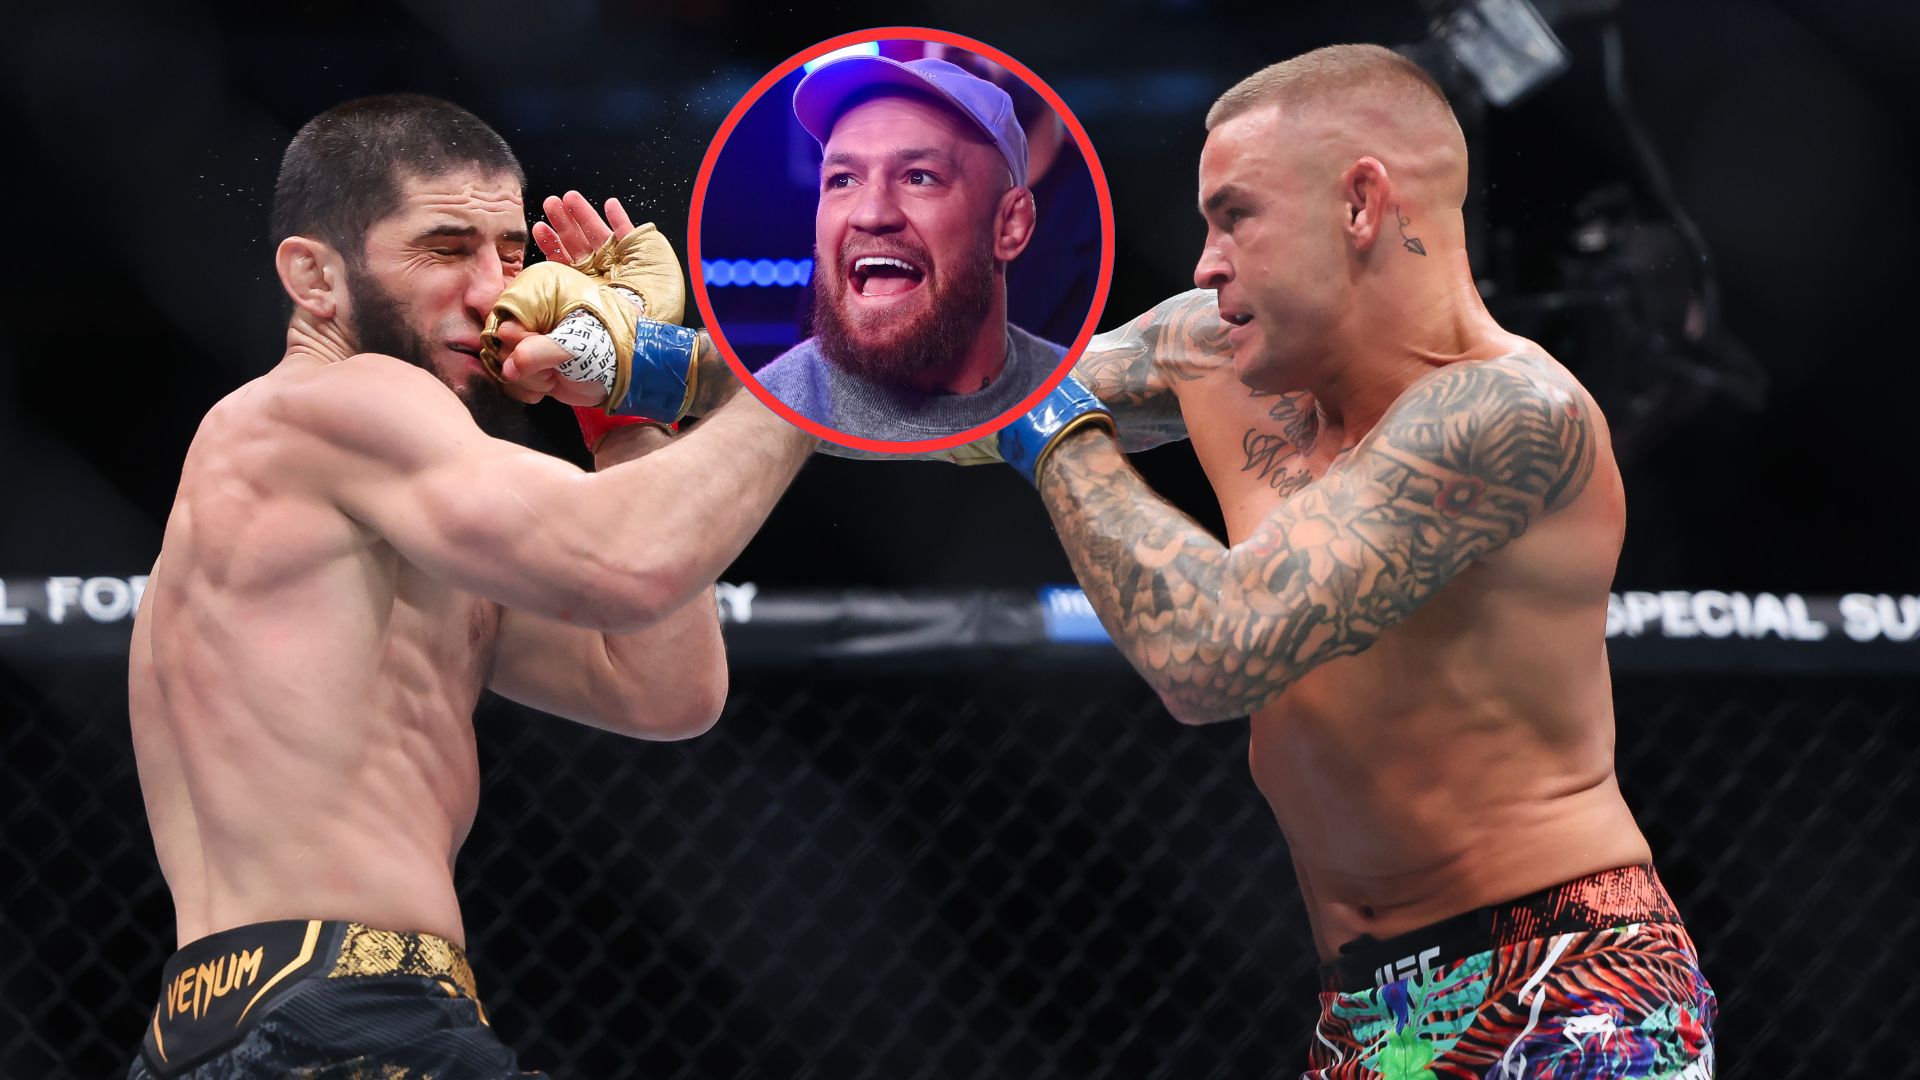 Composite image showing Islam Makhachev and Dustin Poirier punching each other at UFC 302, with a bubble in the middle showing Conor McGregor